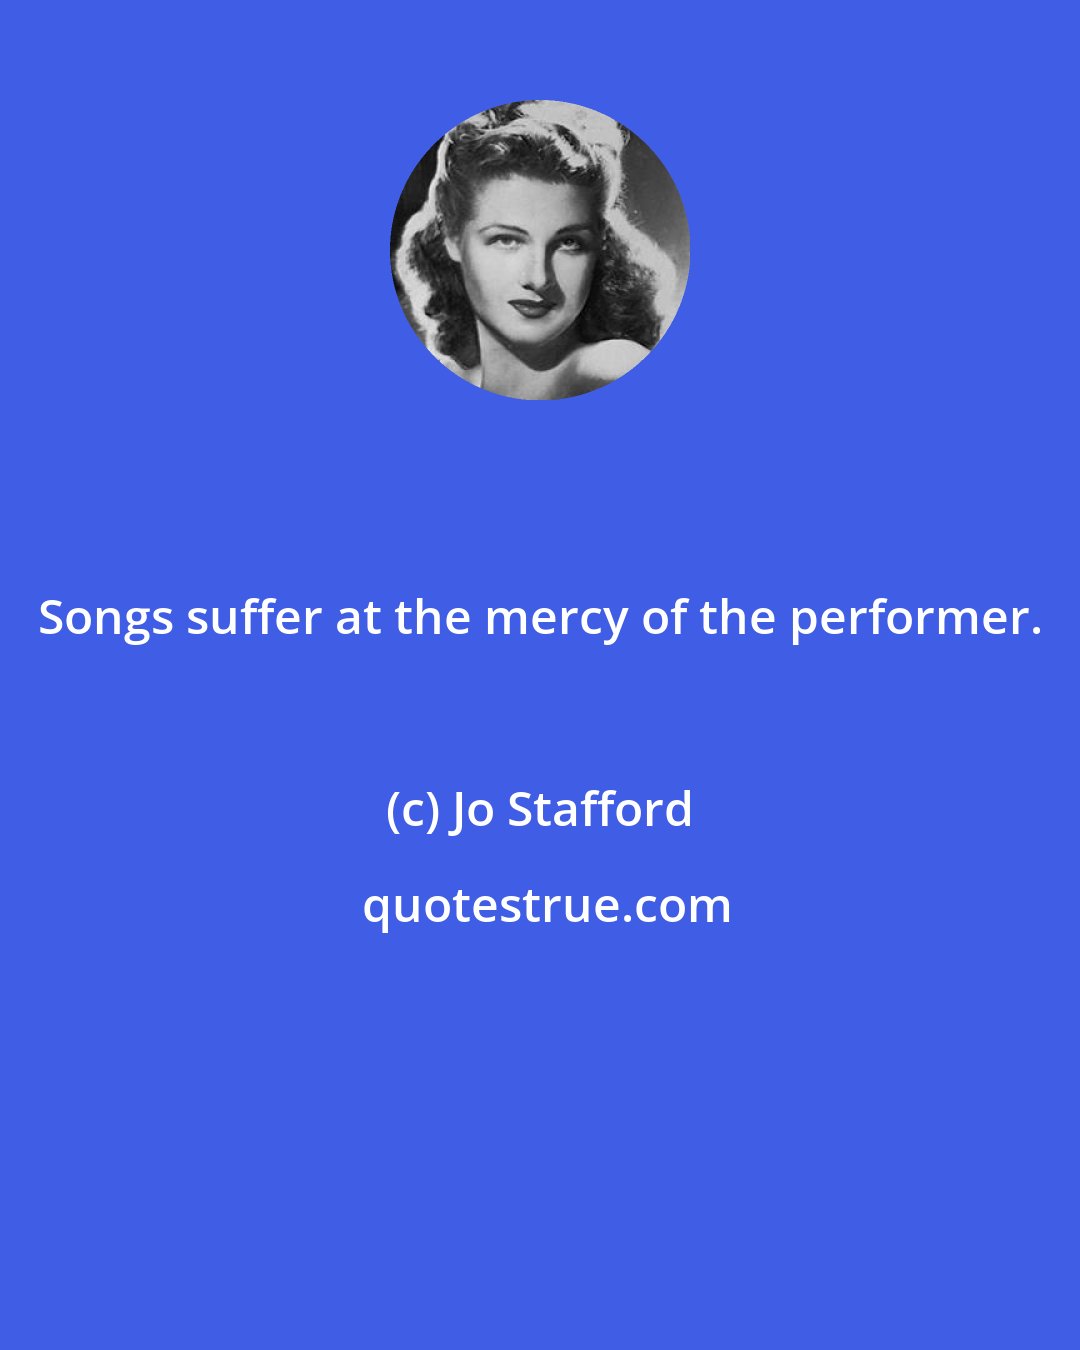 Jo Stafford: Songs suffer at the mercy of the performer.